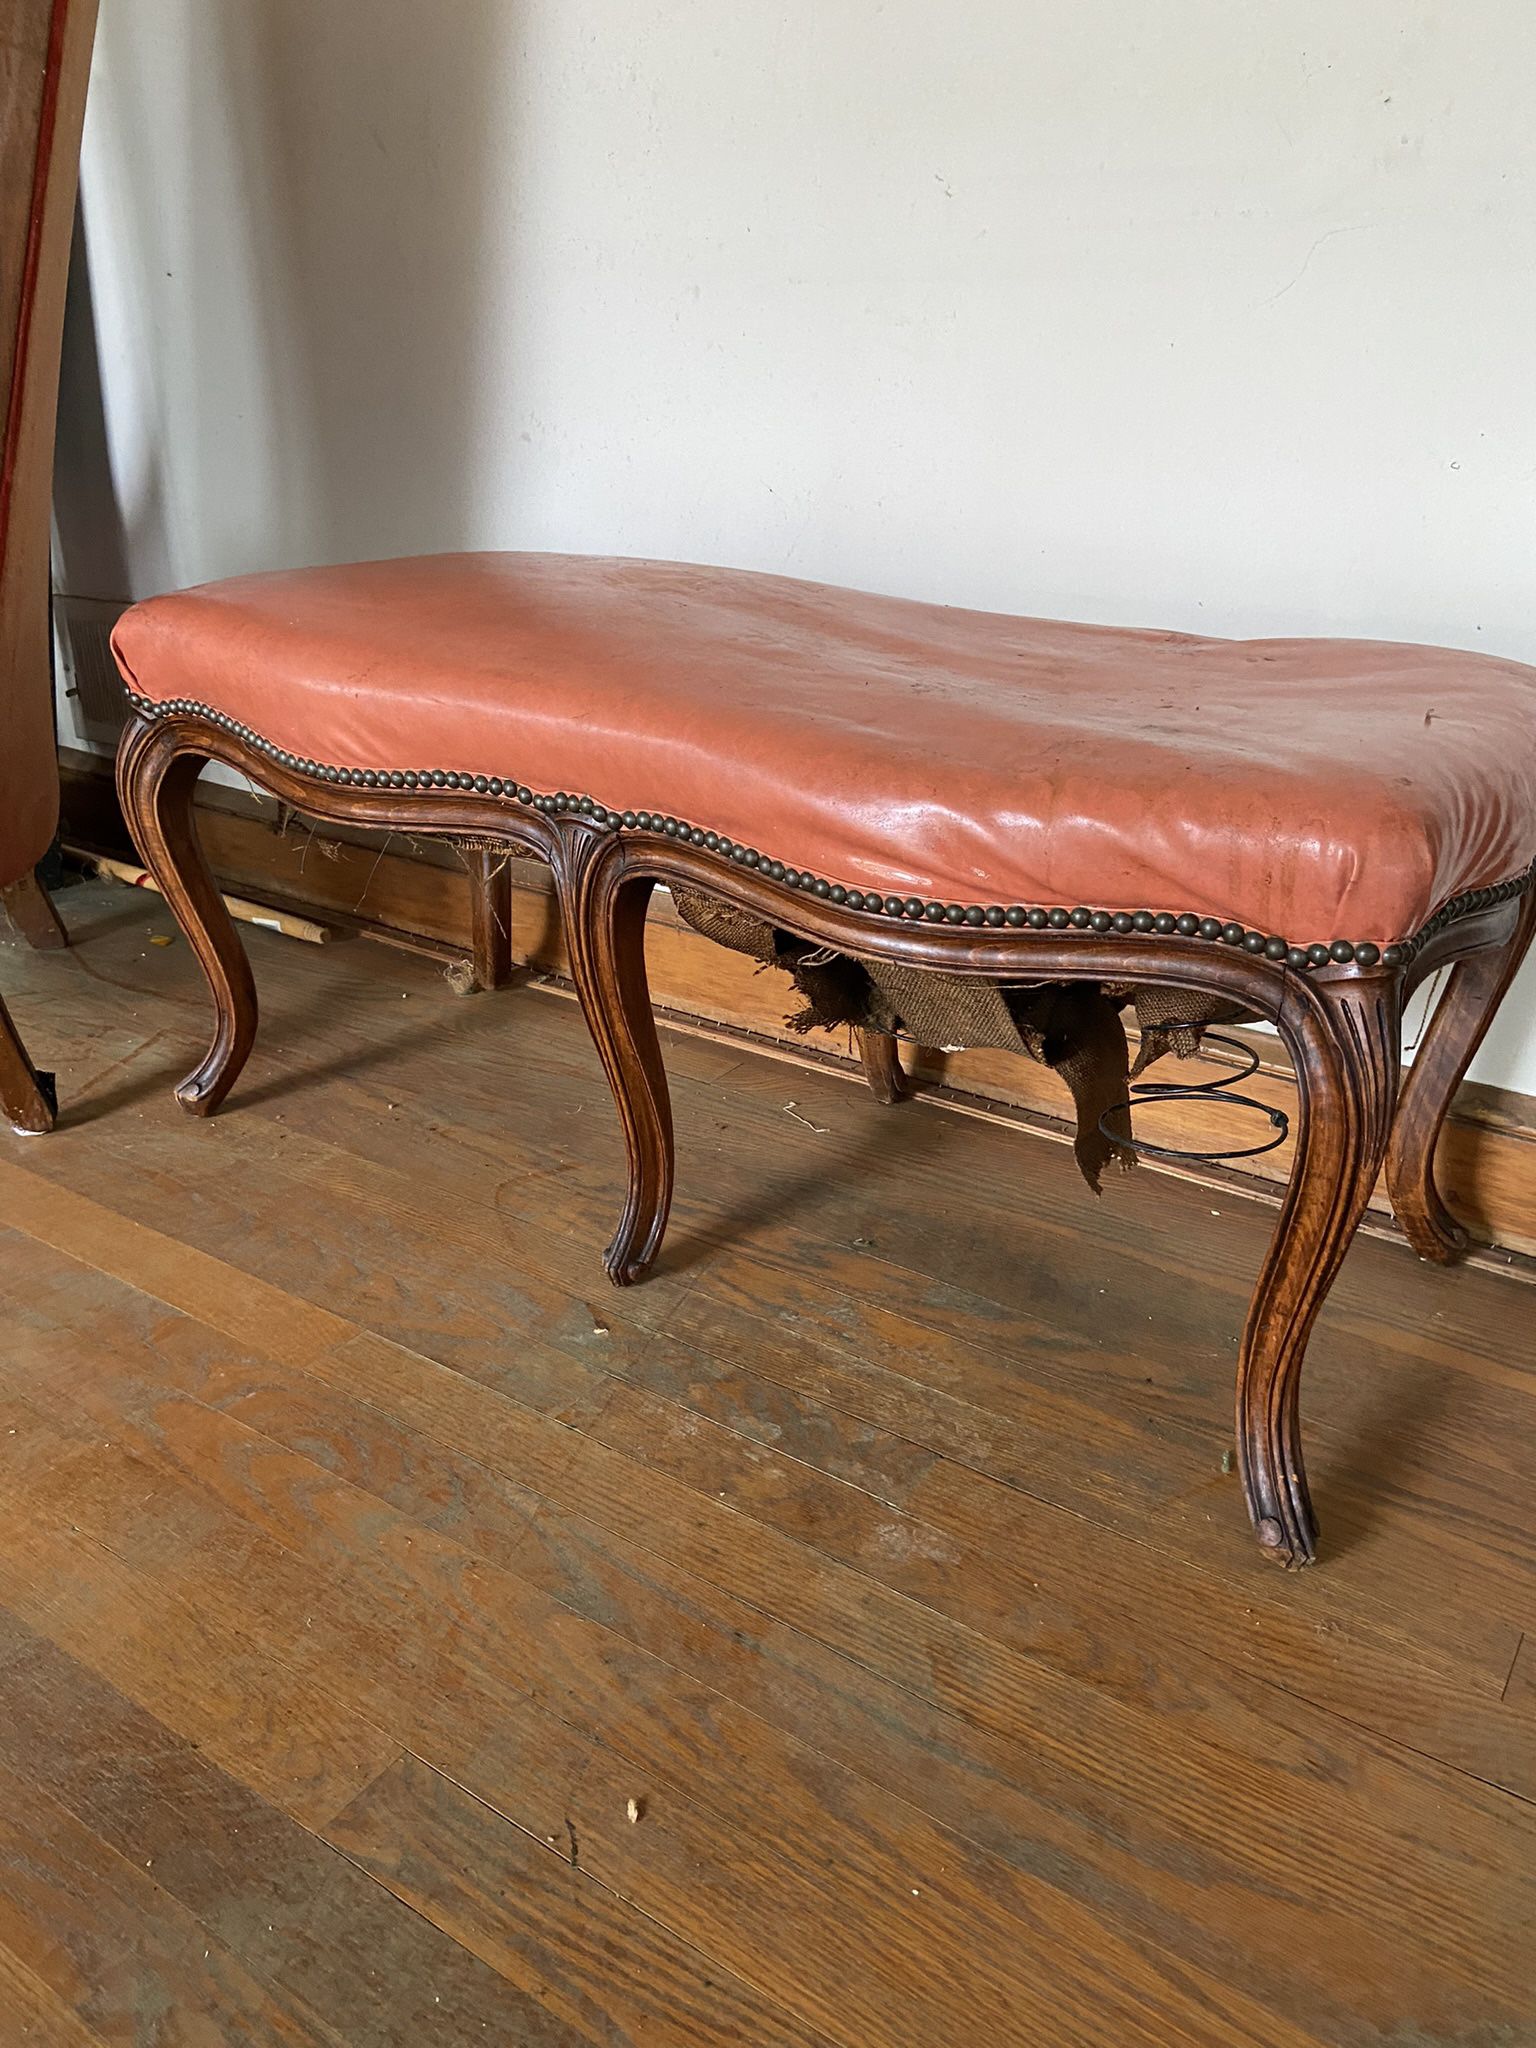 Antique Footstool Bench